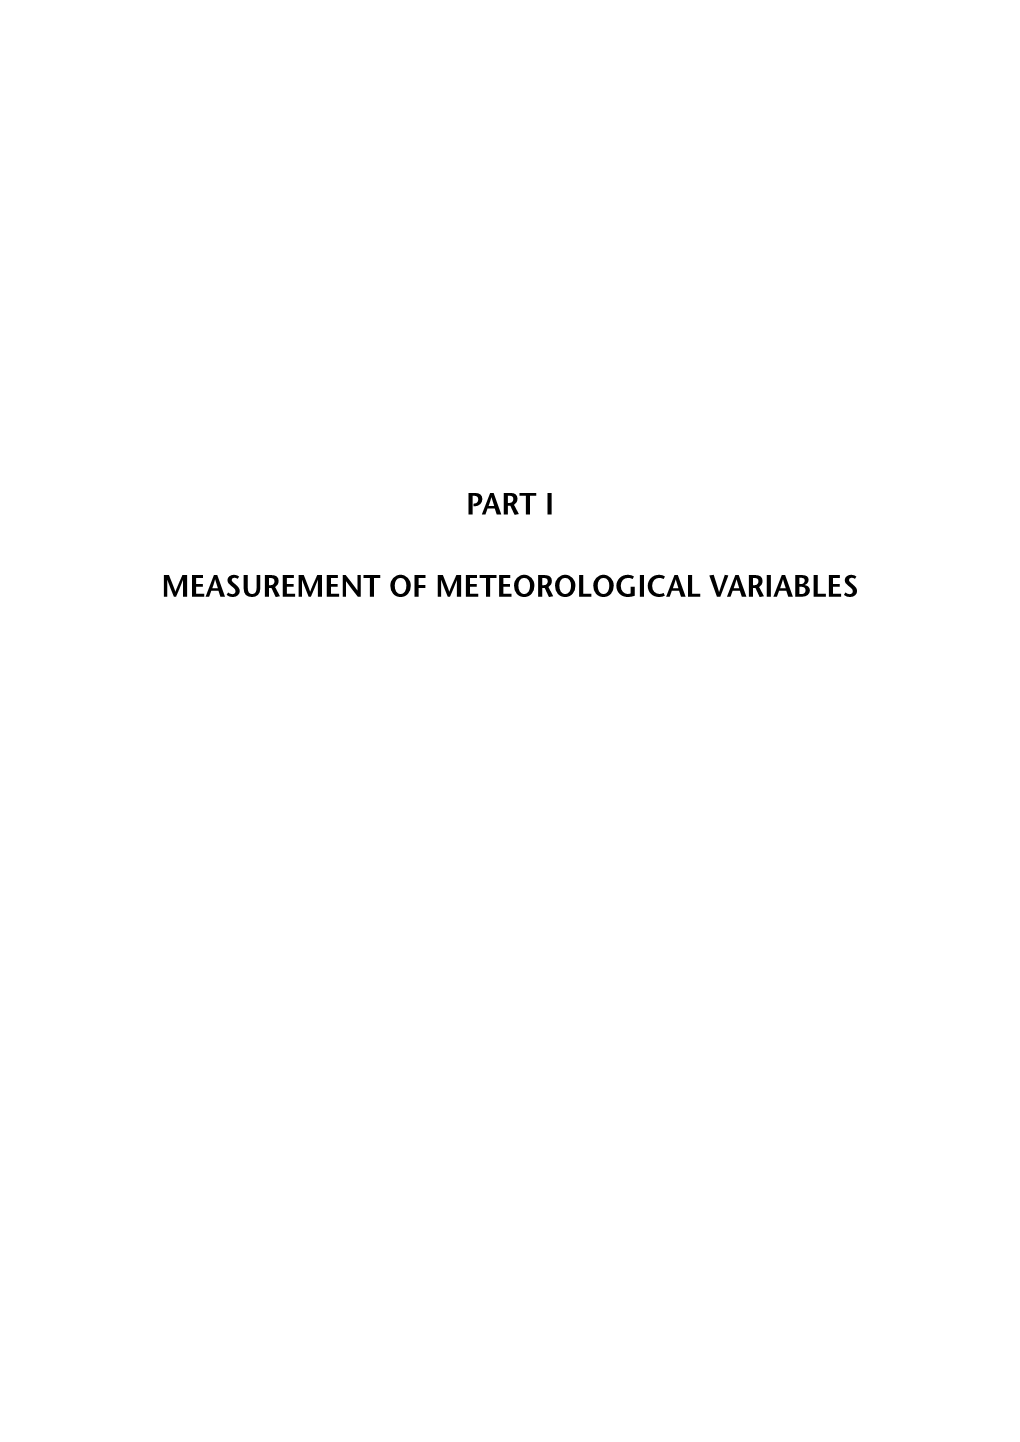 Part I. Measurement of Meteorological Variables Contents